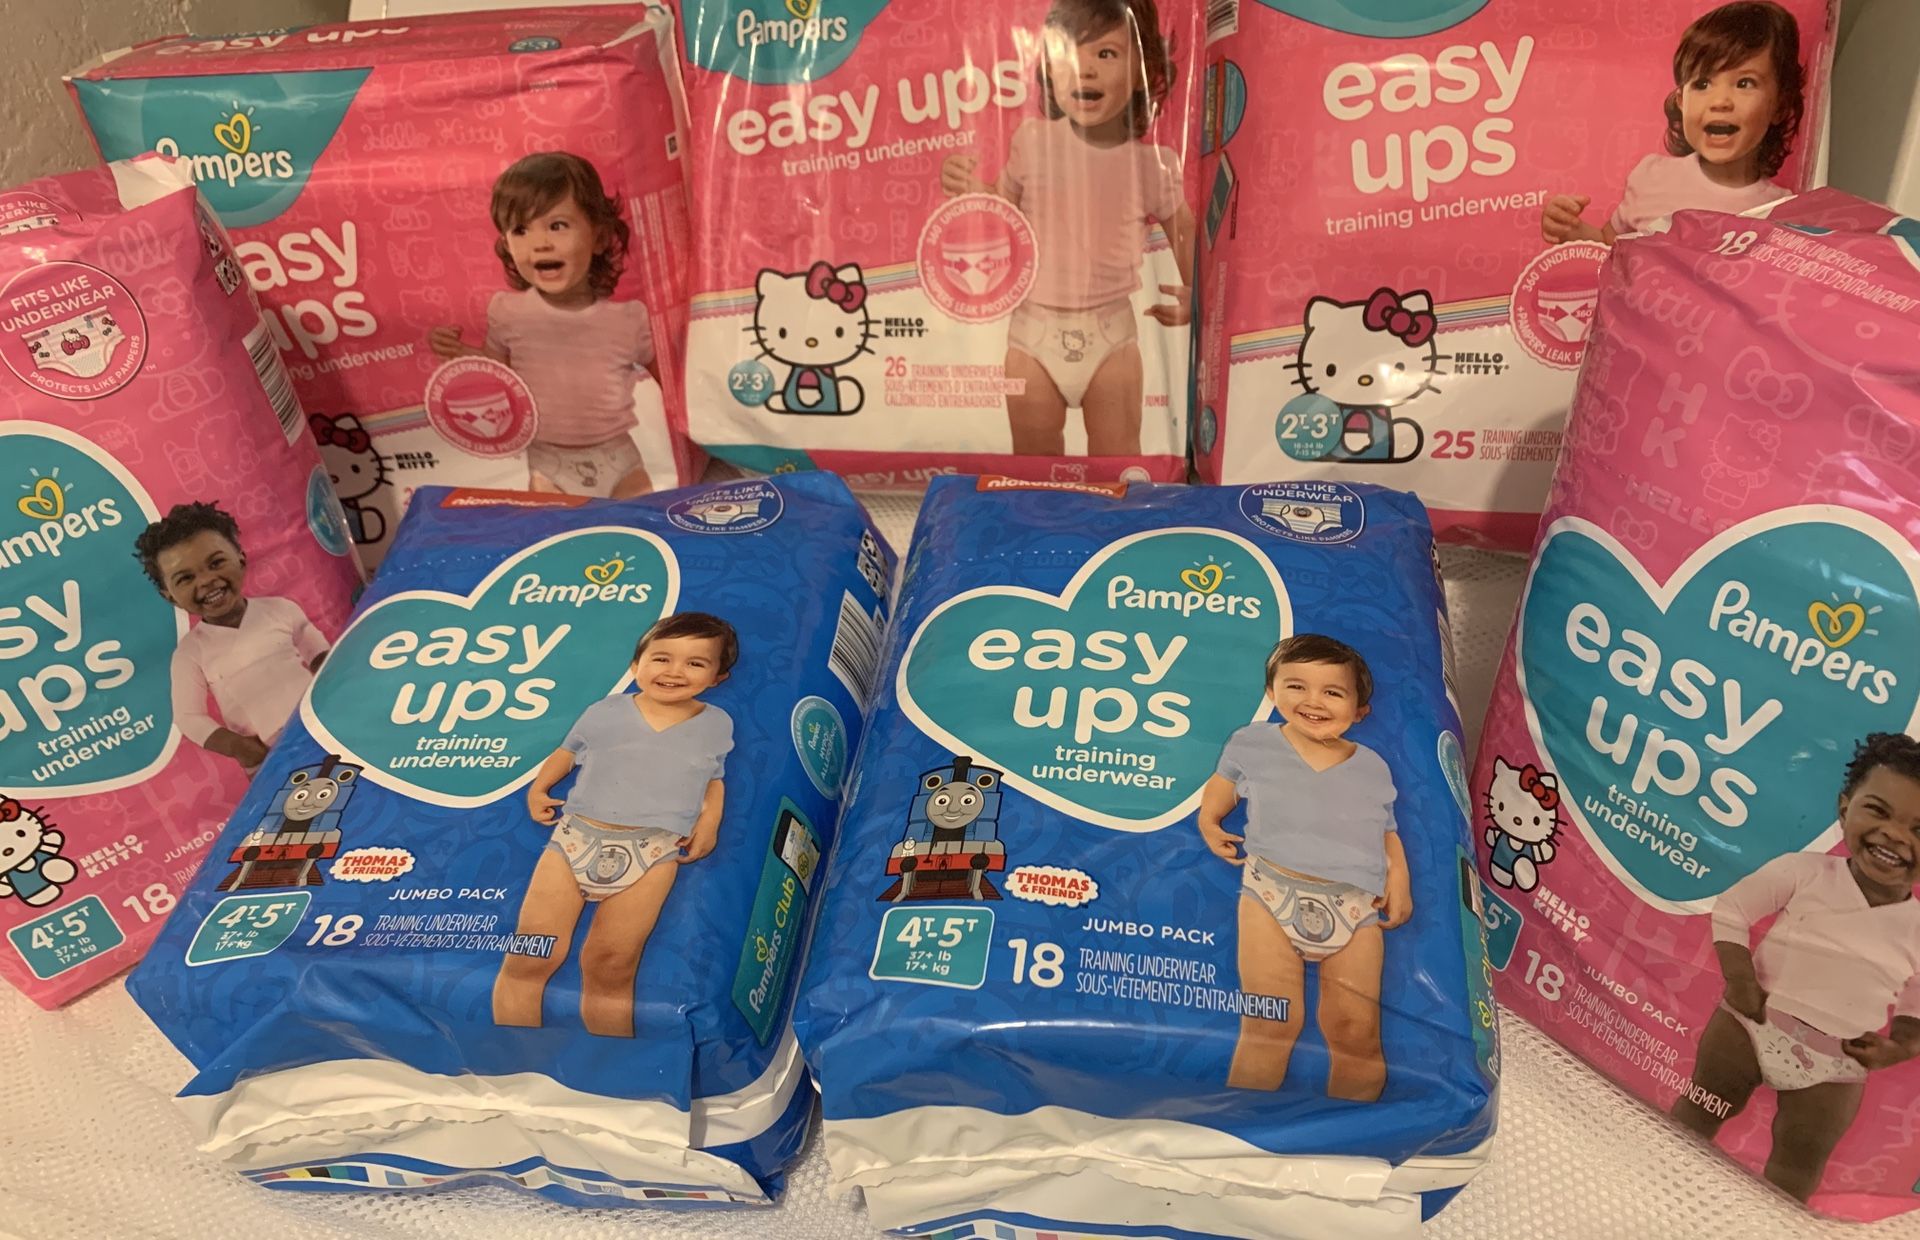 Pampers Easy Ups BOY & GIRL Only these sizes 2t-3t, 3t-4t, 4t-5t PRICE $6